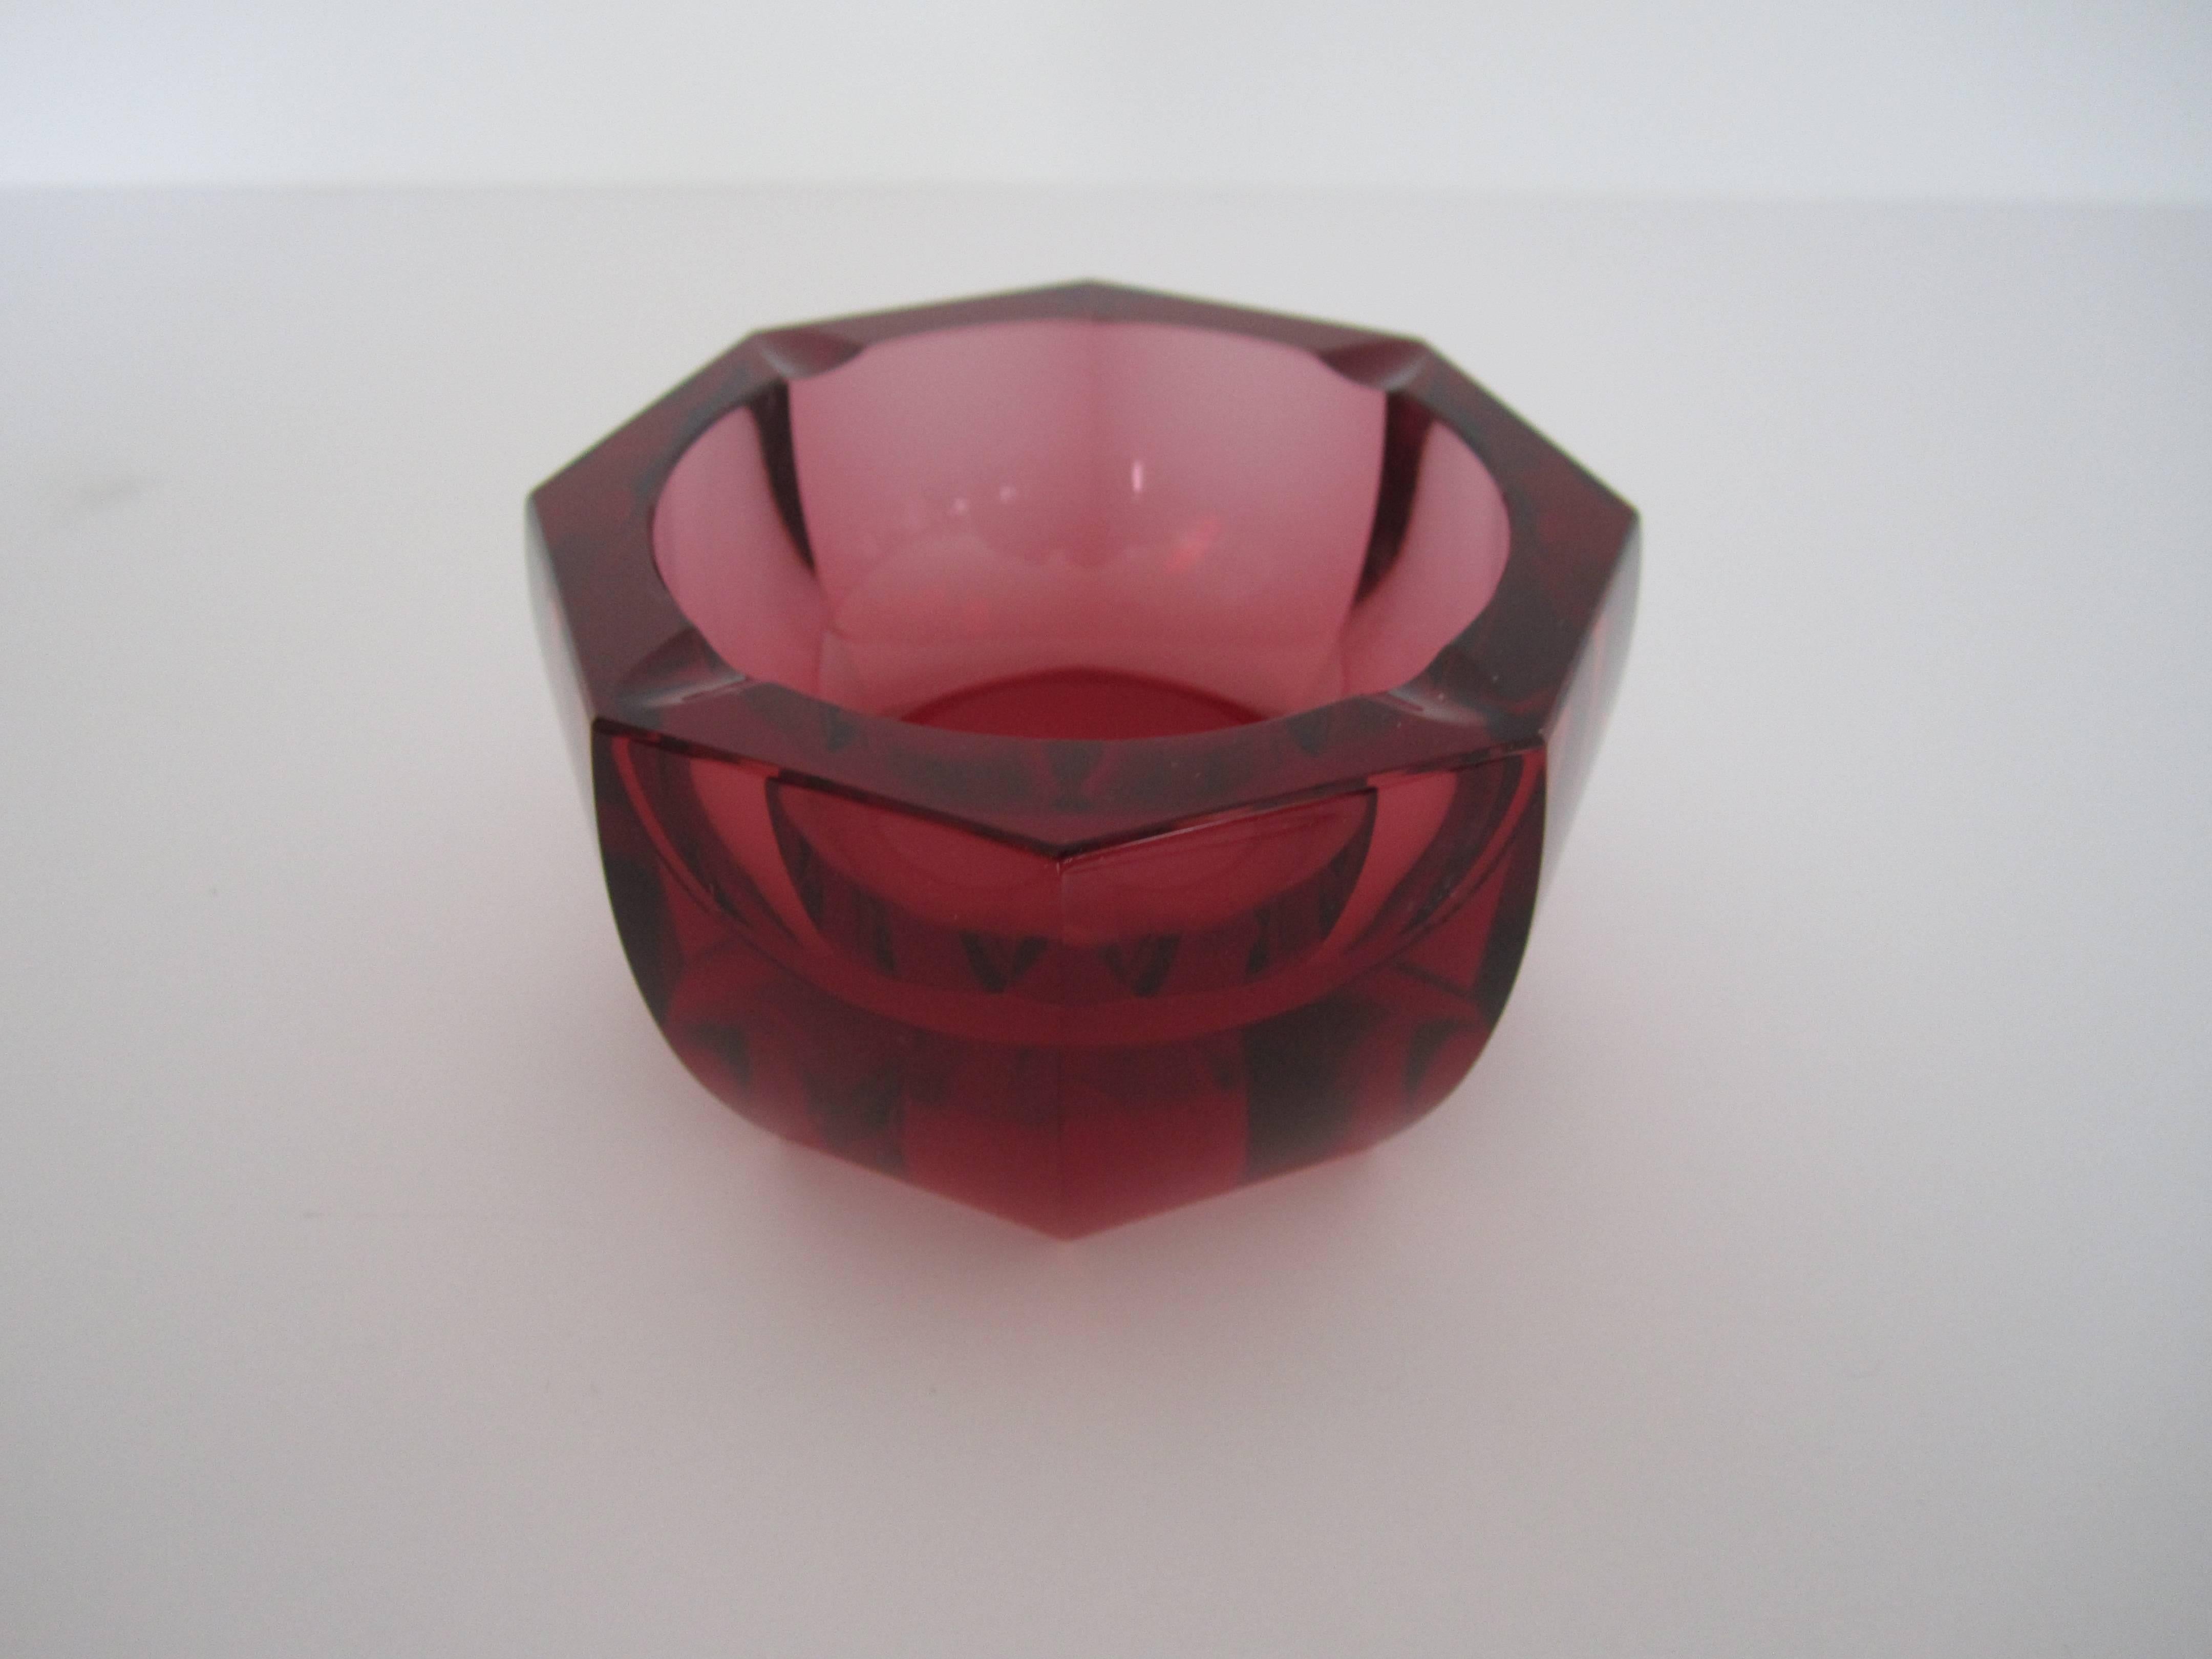 Gorgeous Red Octagonal Crystal Bowl or Ashtray by Moser 3